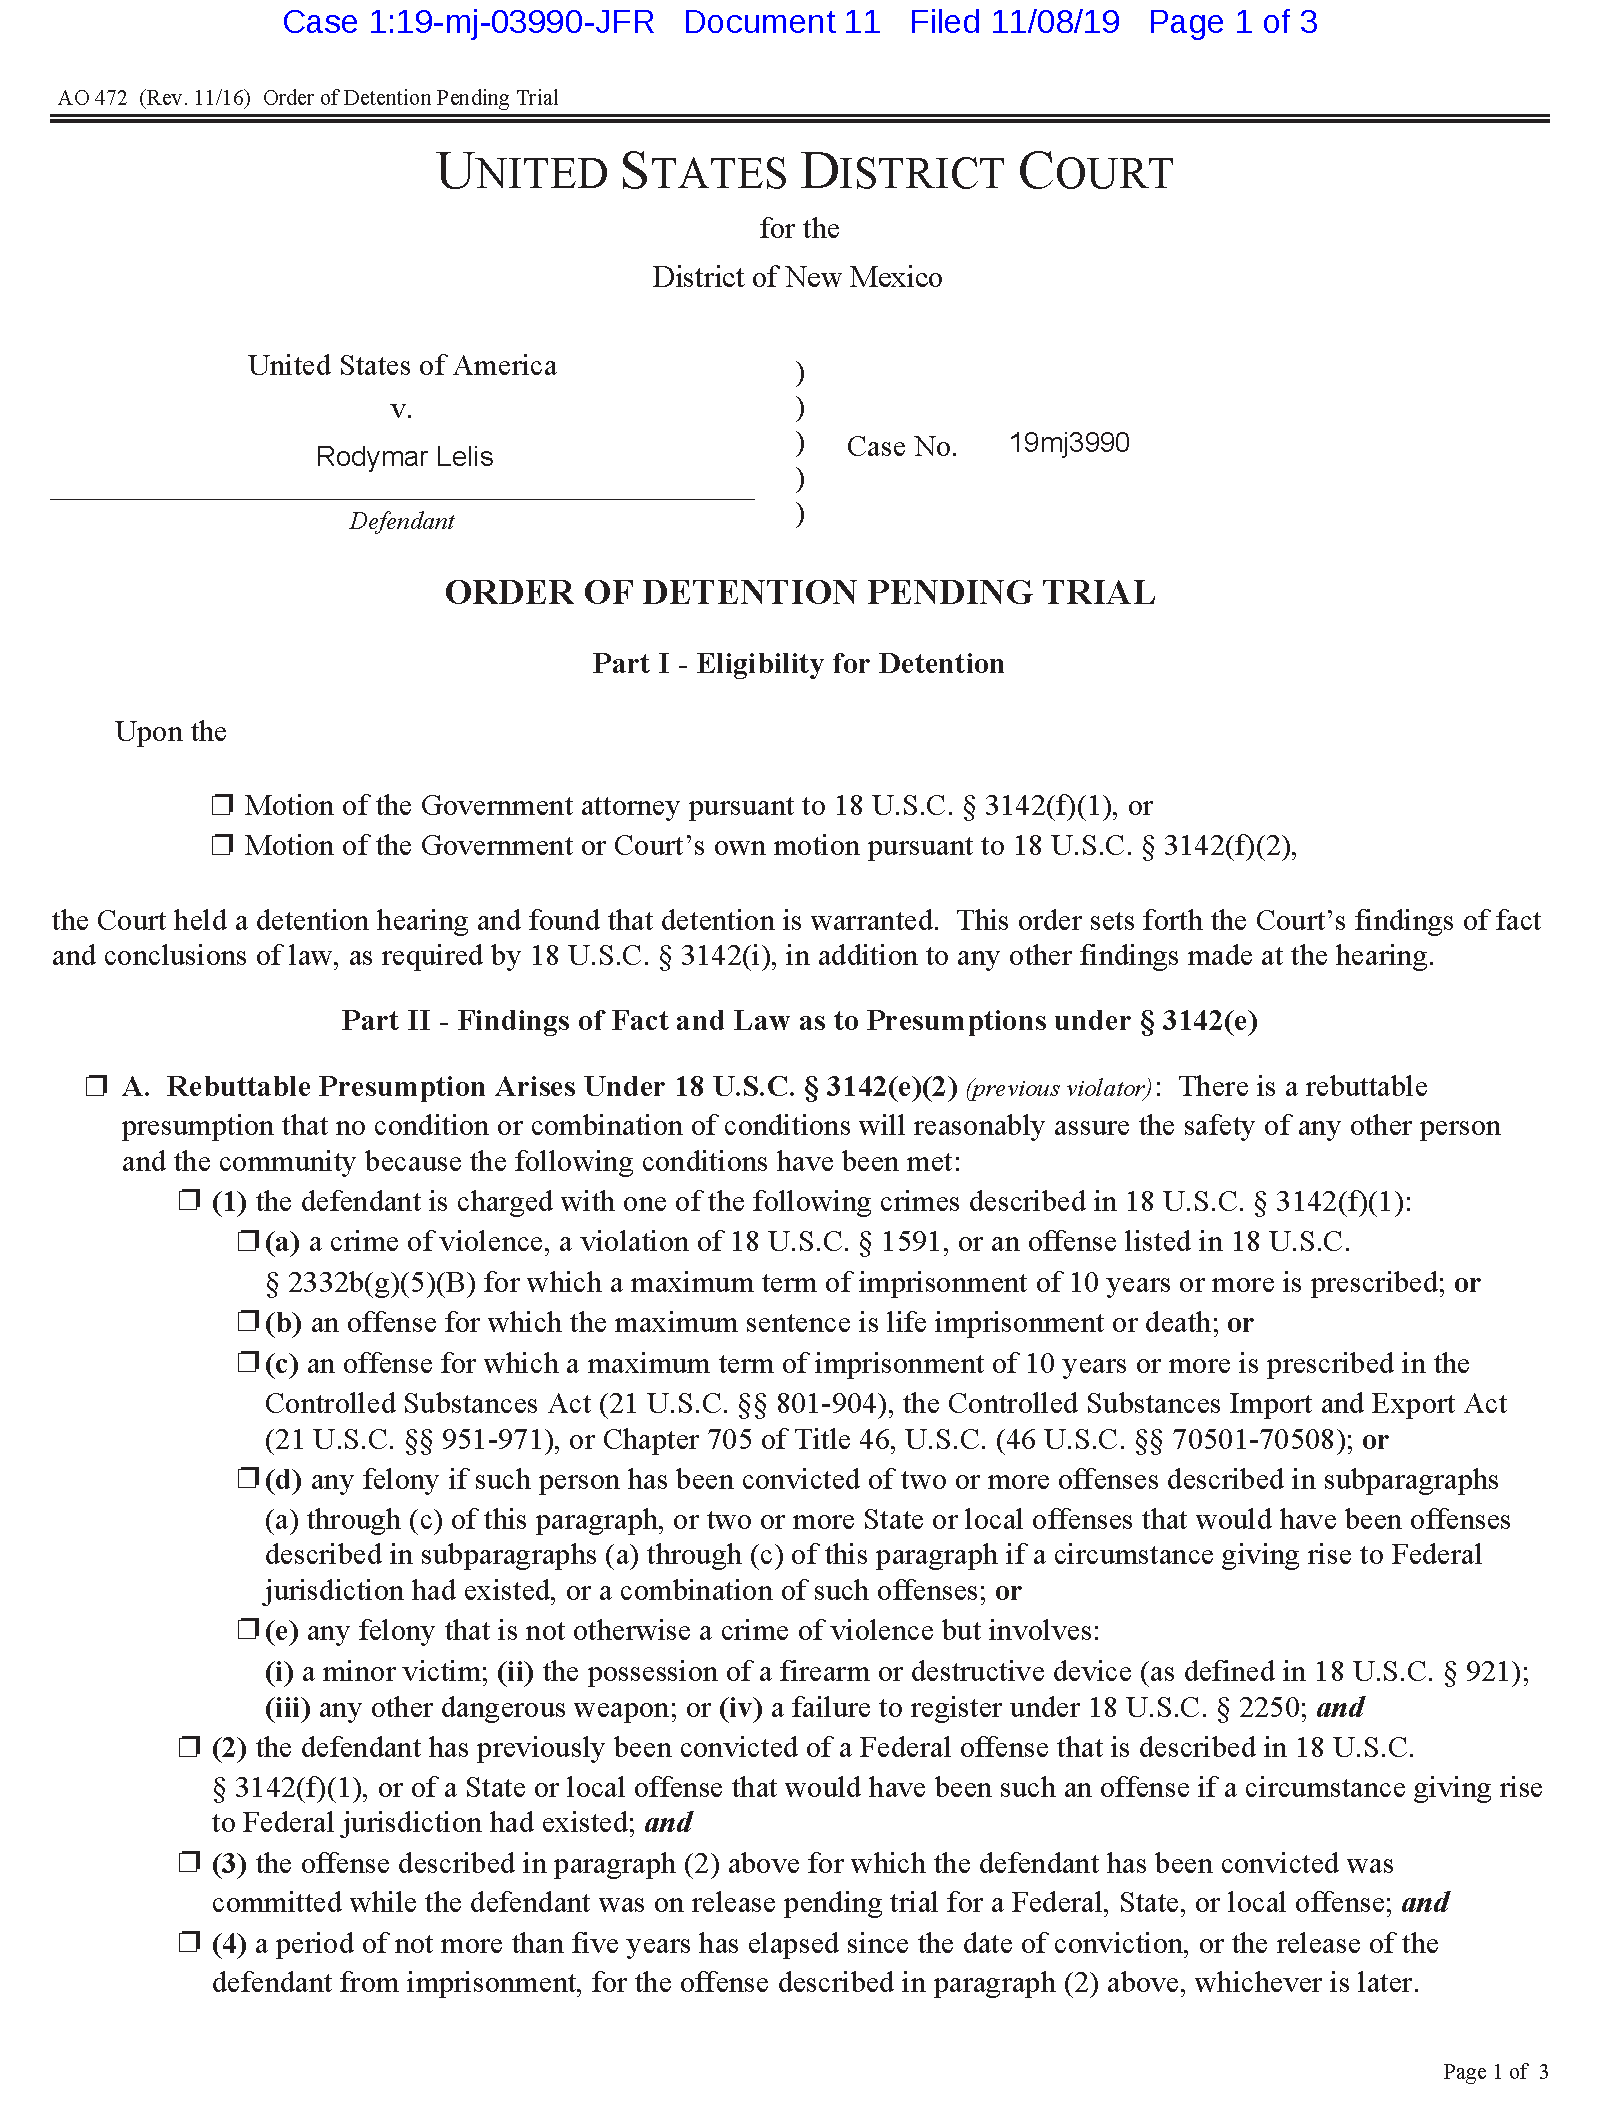 Copy of OrderOfDetention1.png